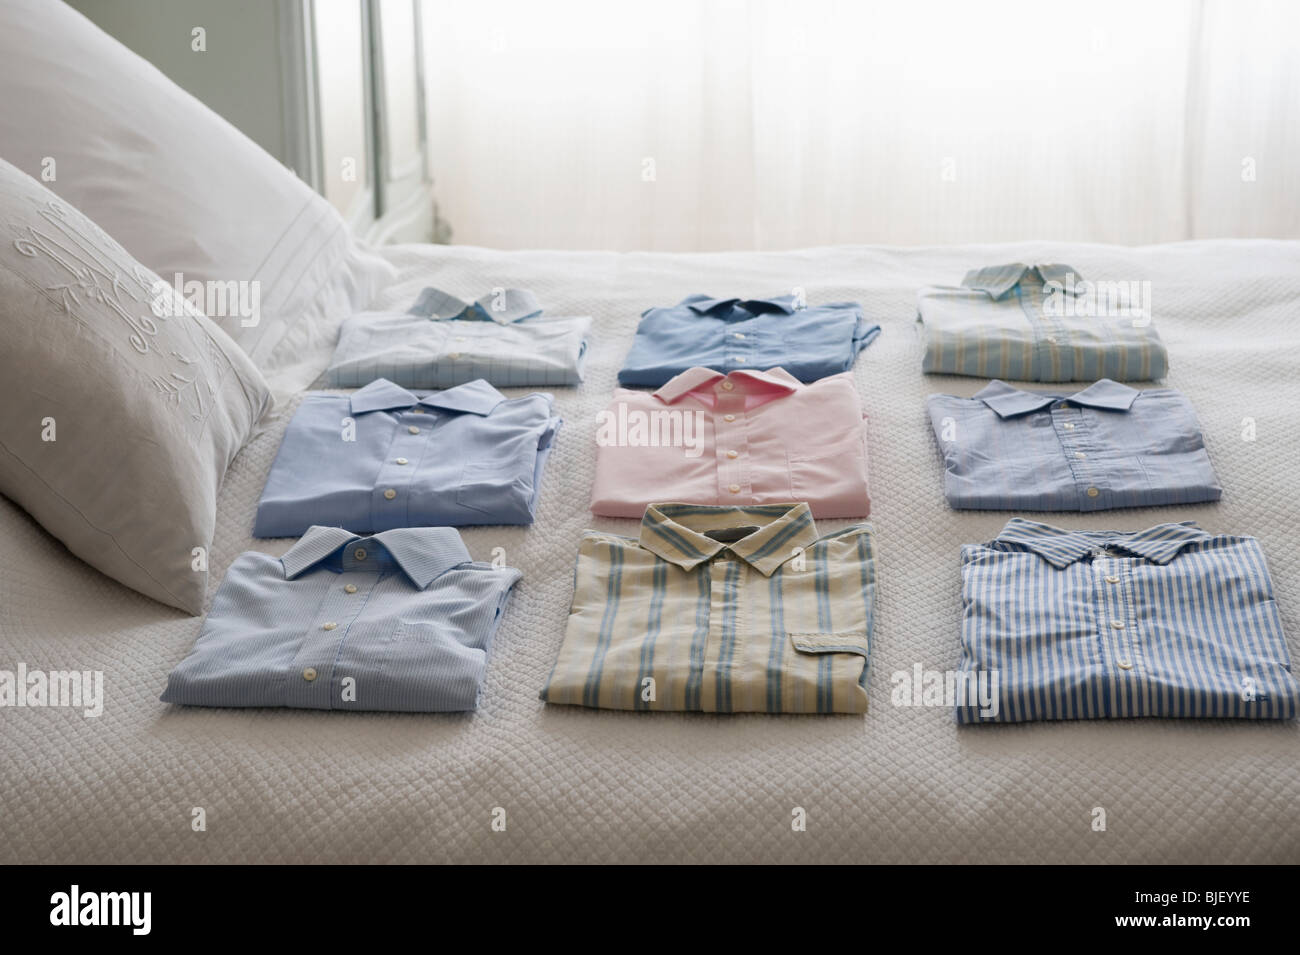 Clean shirts ordered on a bed Stock Photo